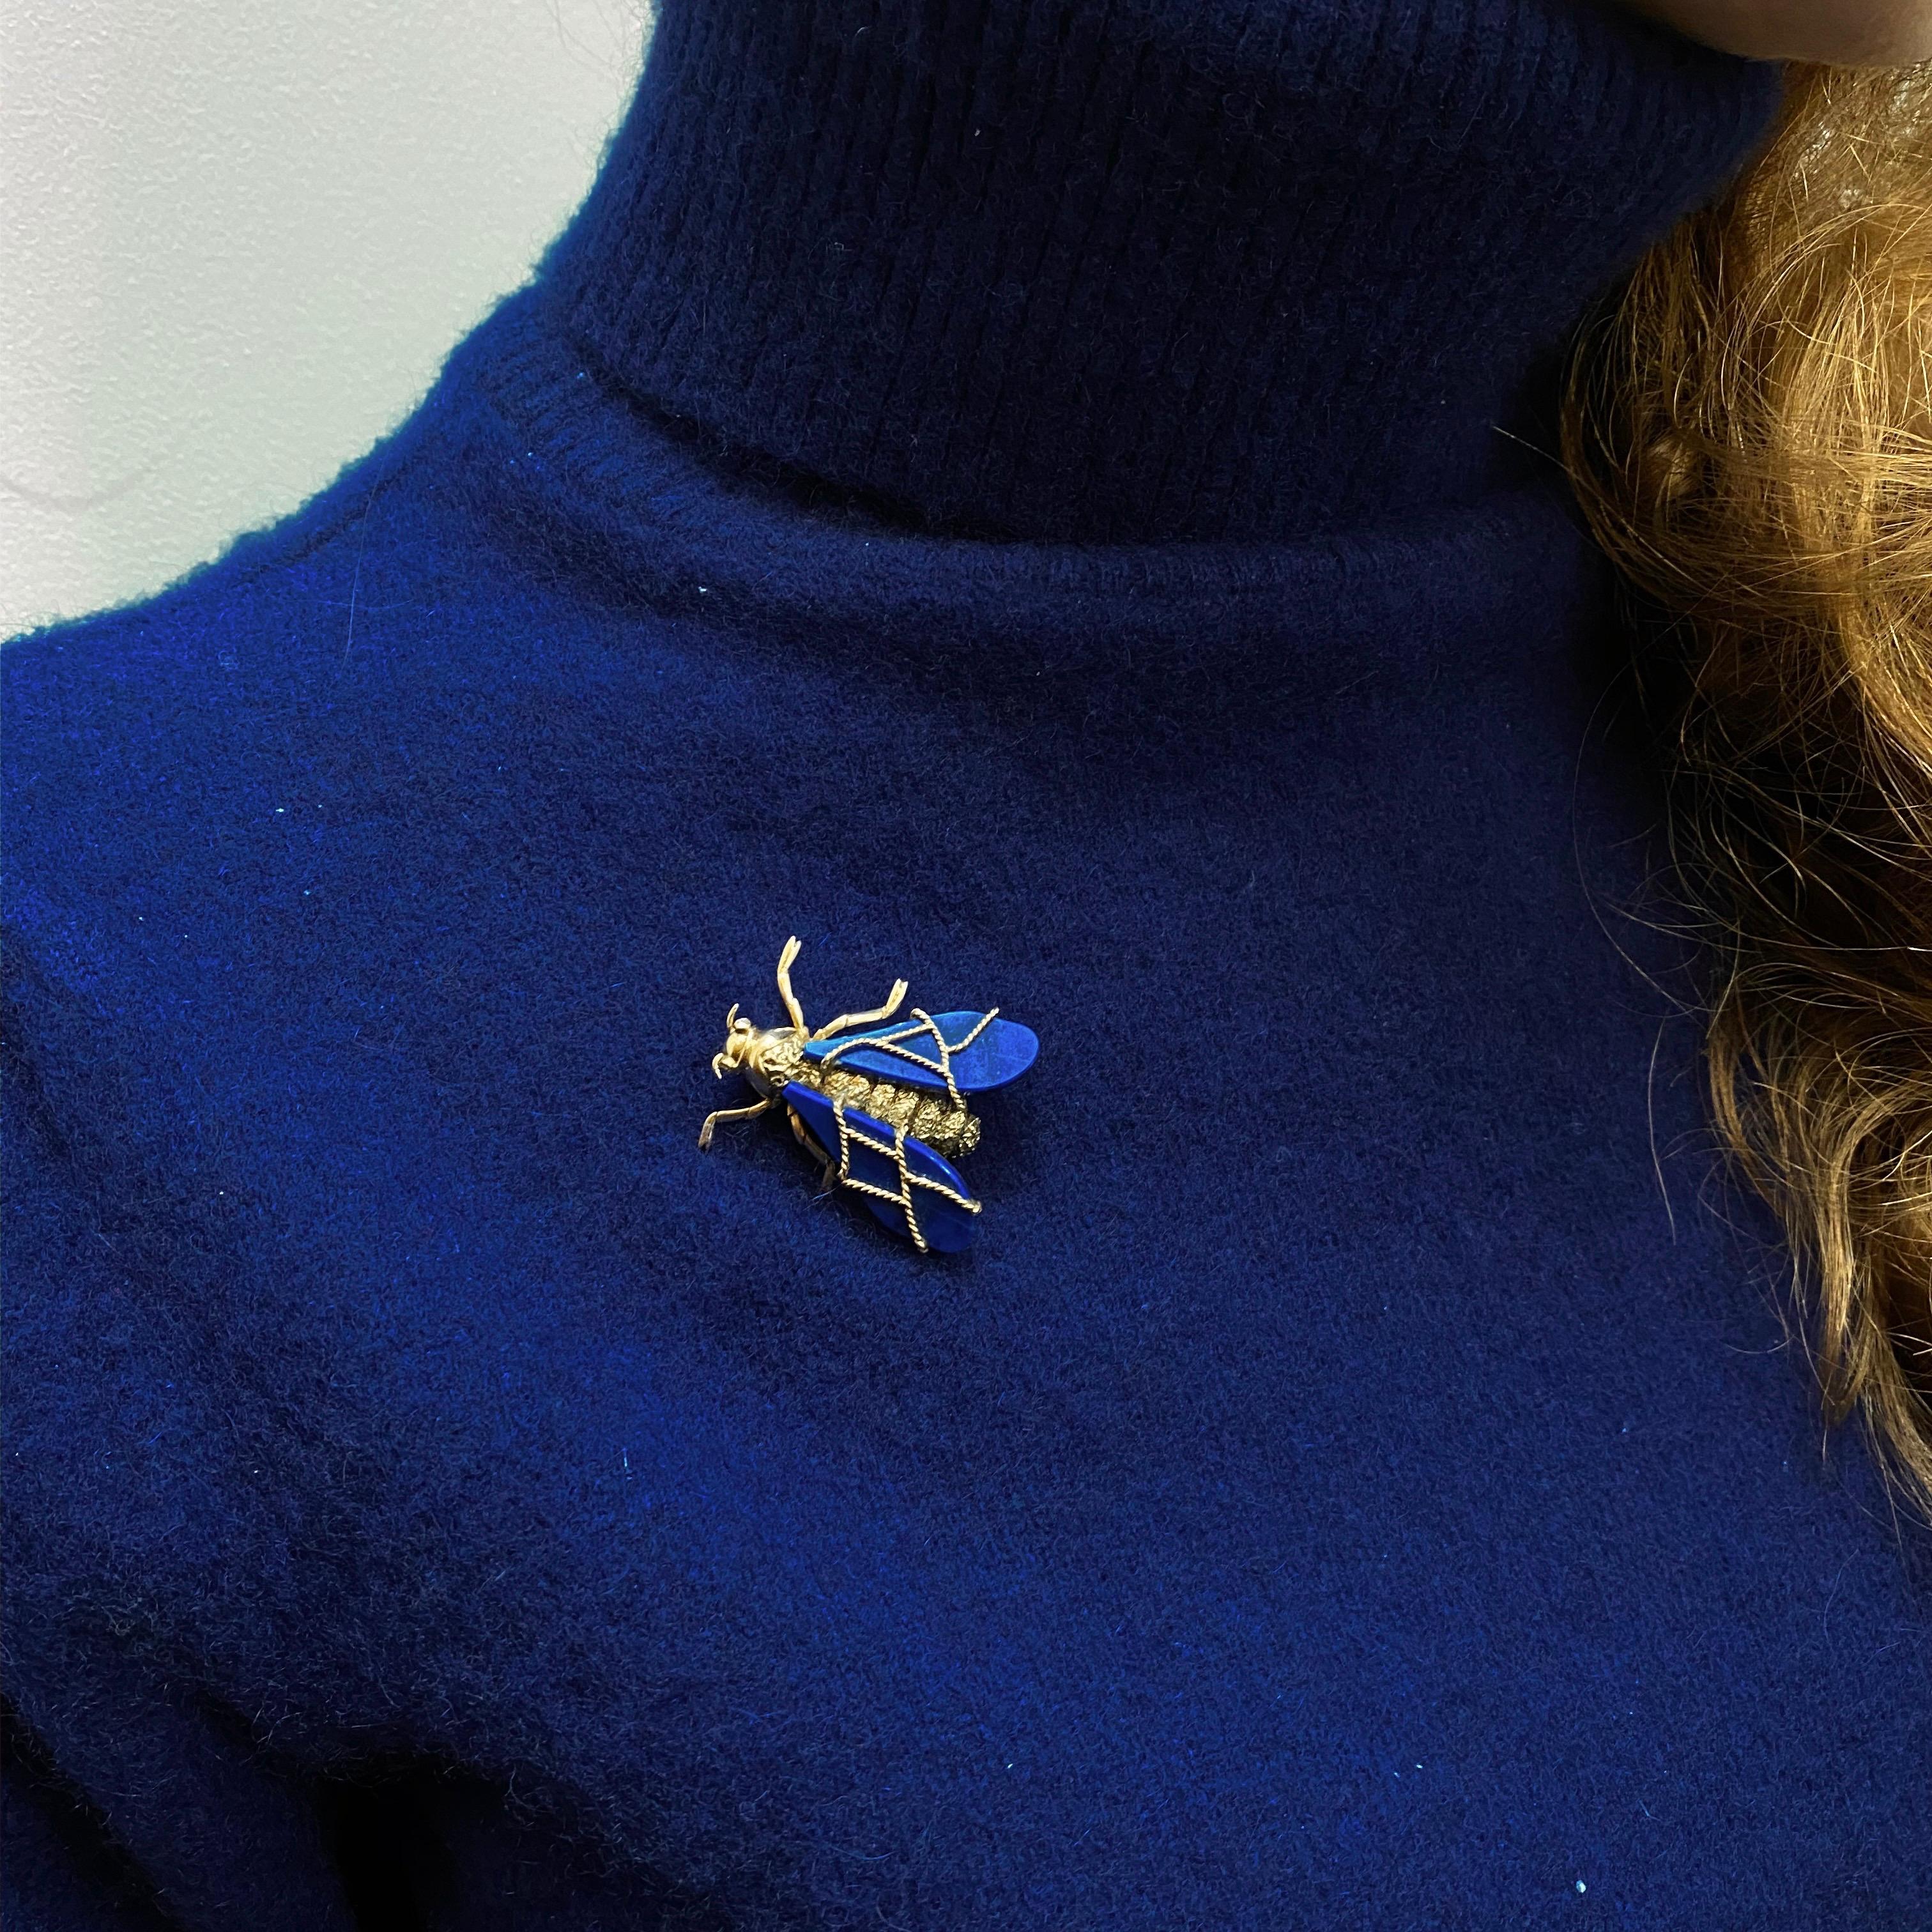 Chaumet Vintage Lapis Lazuli and Diamond Queen Bee Brooch in 18 Karat Yellow Gold, 1970s. This brooch is modelled as a queen bee ready to fly, with lapis lazuli wings detailed with twisted yellow gold rope veins, leading to the ridged body with a